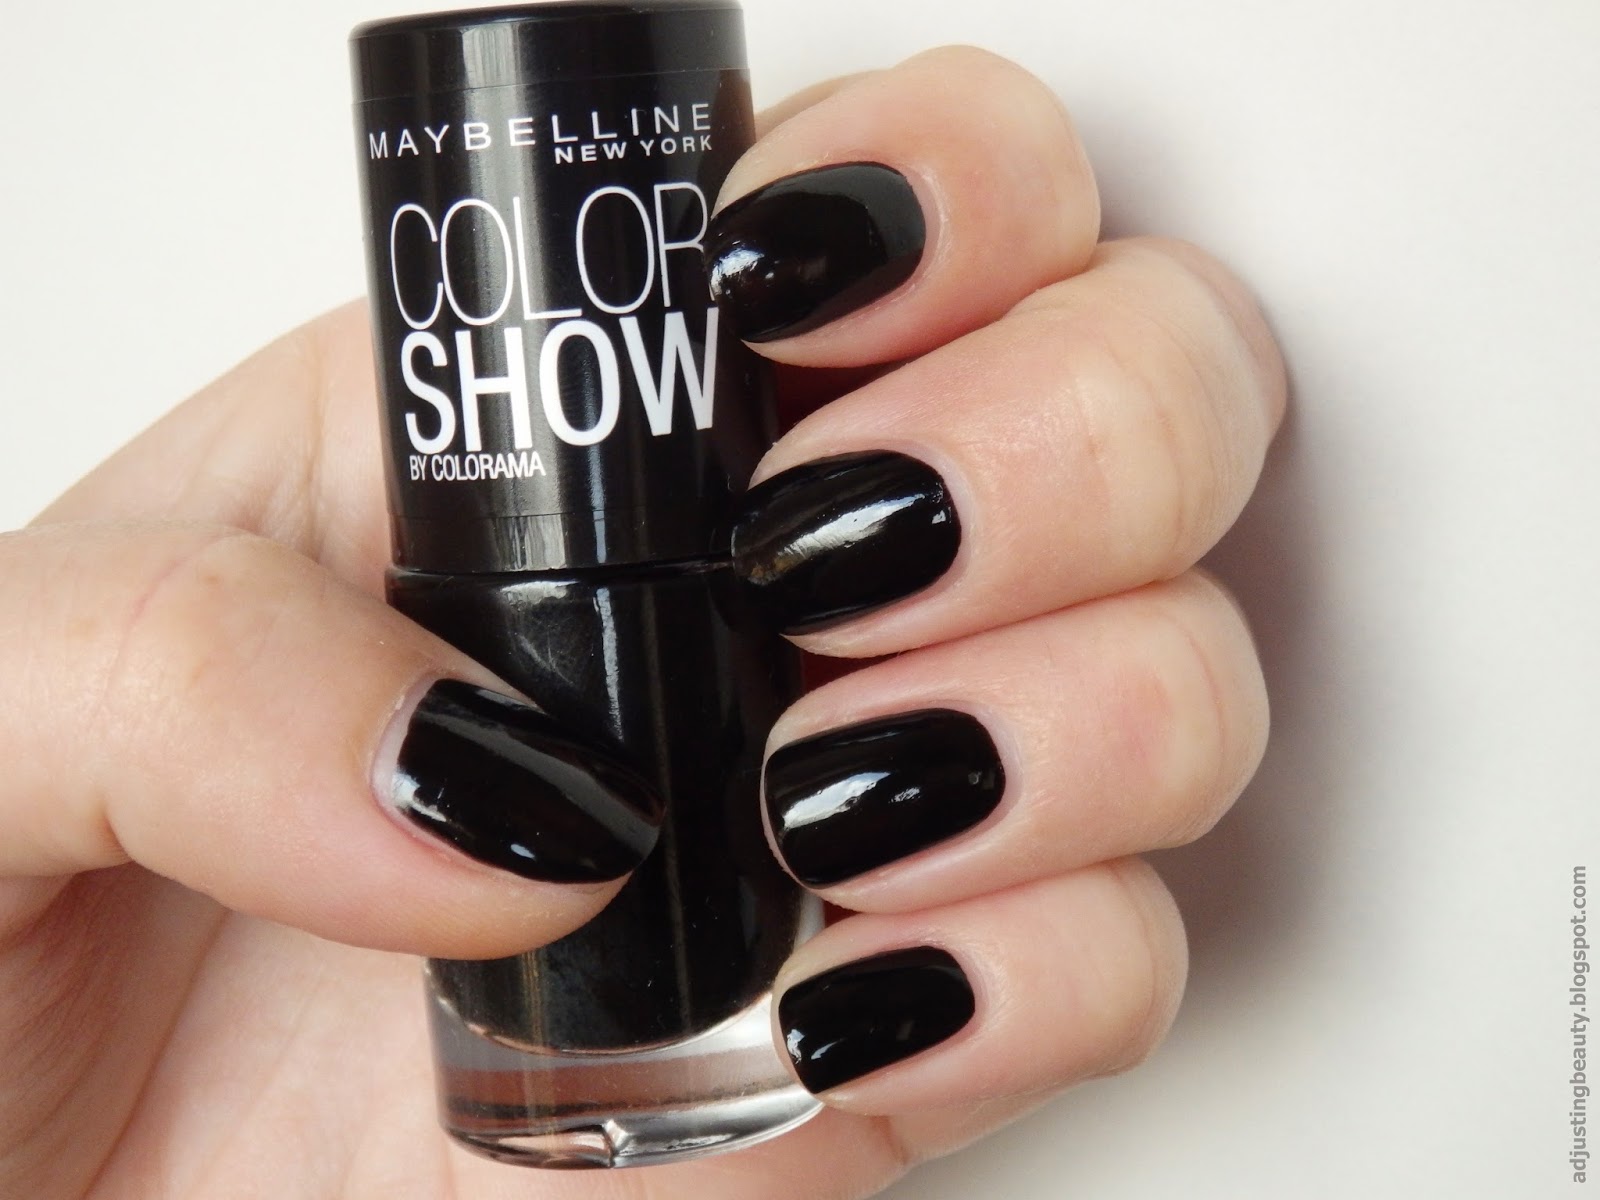 Maybelline Color Show Nail Lacquer in Orange Fix - wide 4